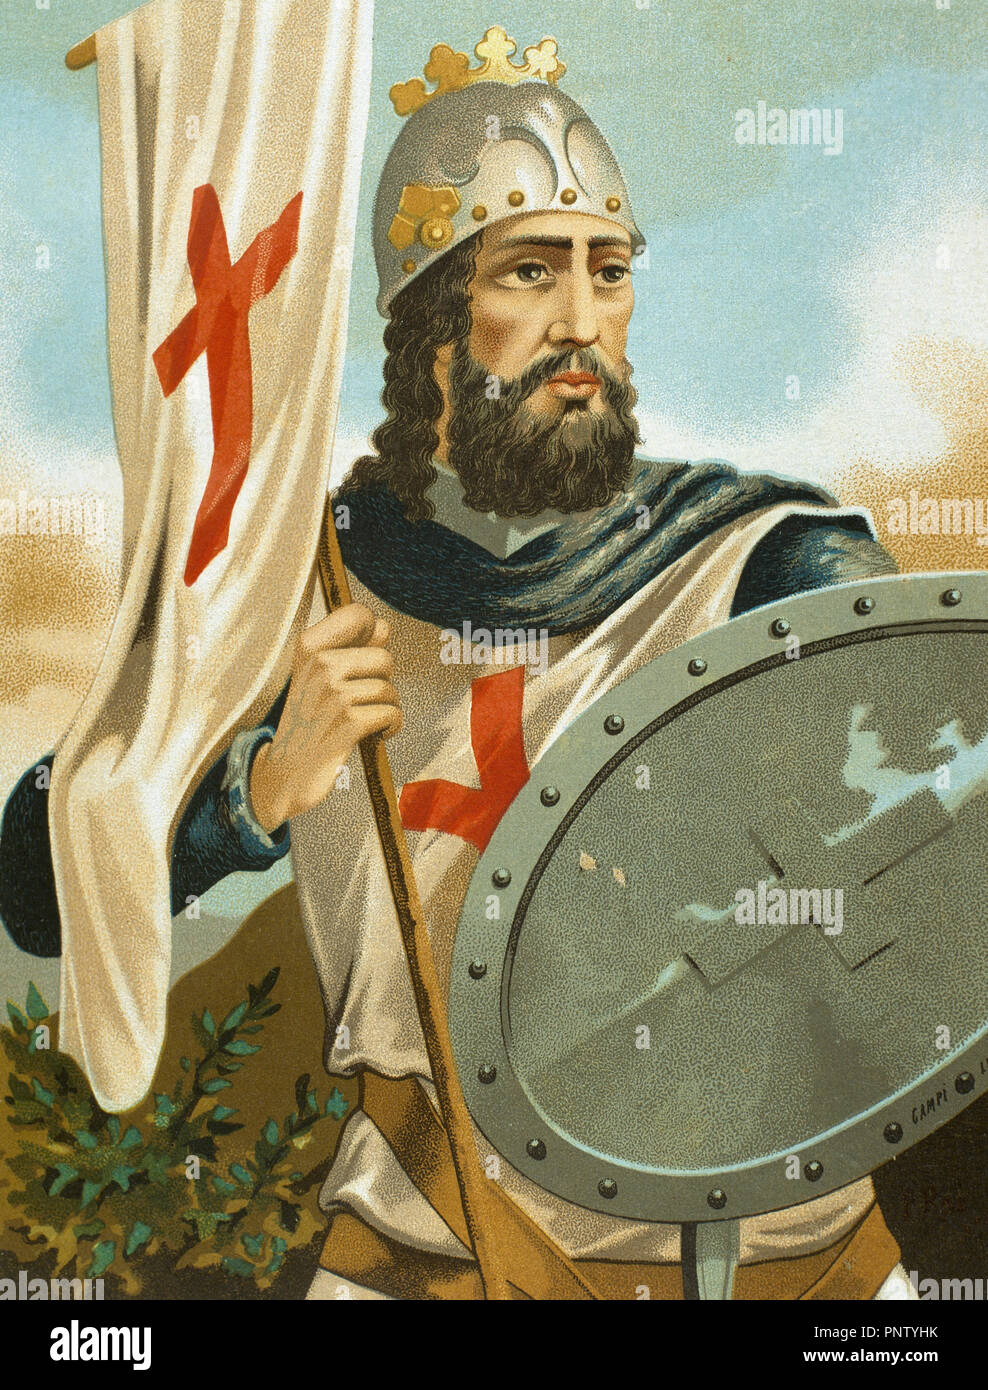 Pelagius of Asturias (c. 685-737). Visigothic nobleman founder of the Kingdom of Asturias. First king of Asturias and winner of the Battle of Covadonga against the Muslims. Portrait. Chromolithography, 1875. Stock Photo